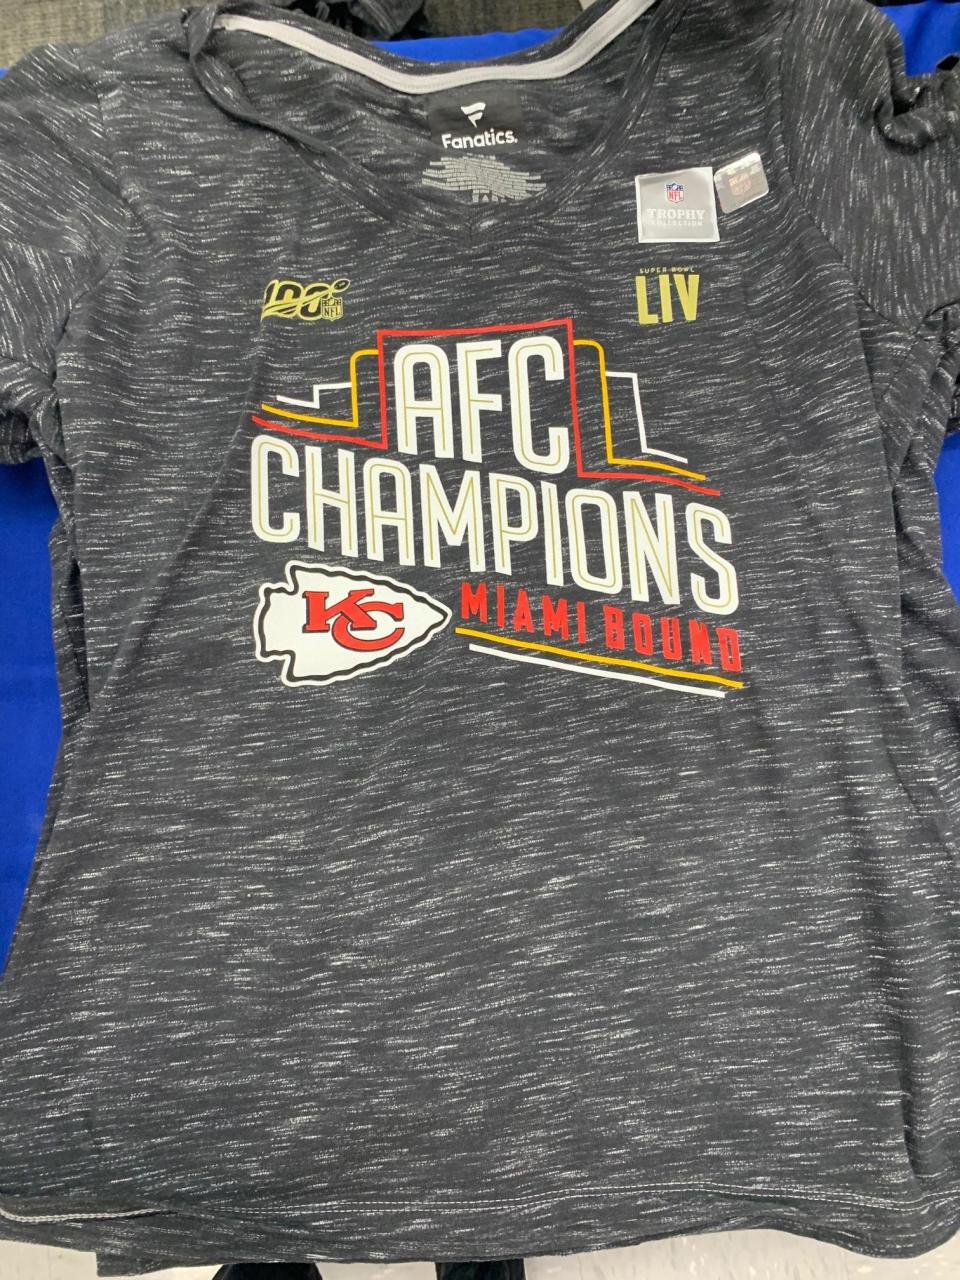 Academy Sports + Outdoors has started selling merchandise for the AFC champion Kansas City Chiefs.